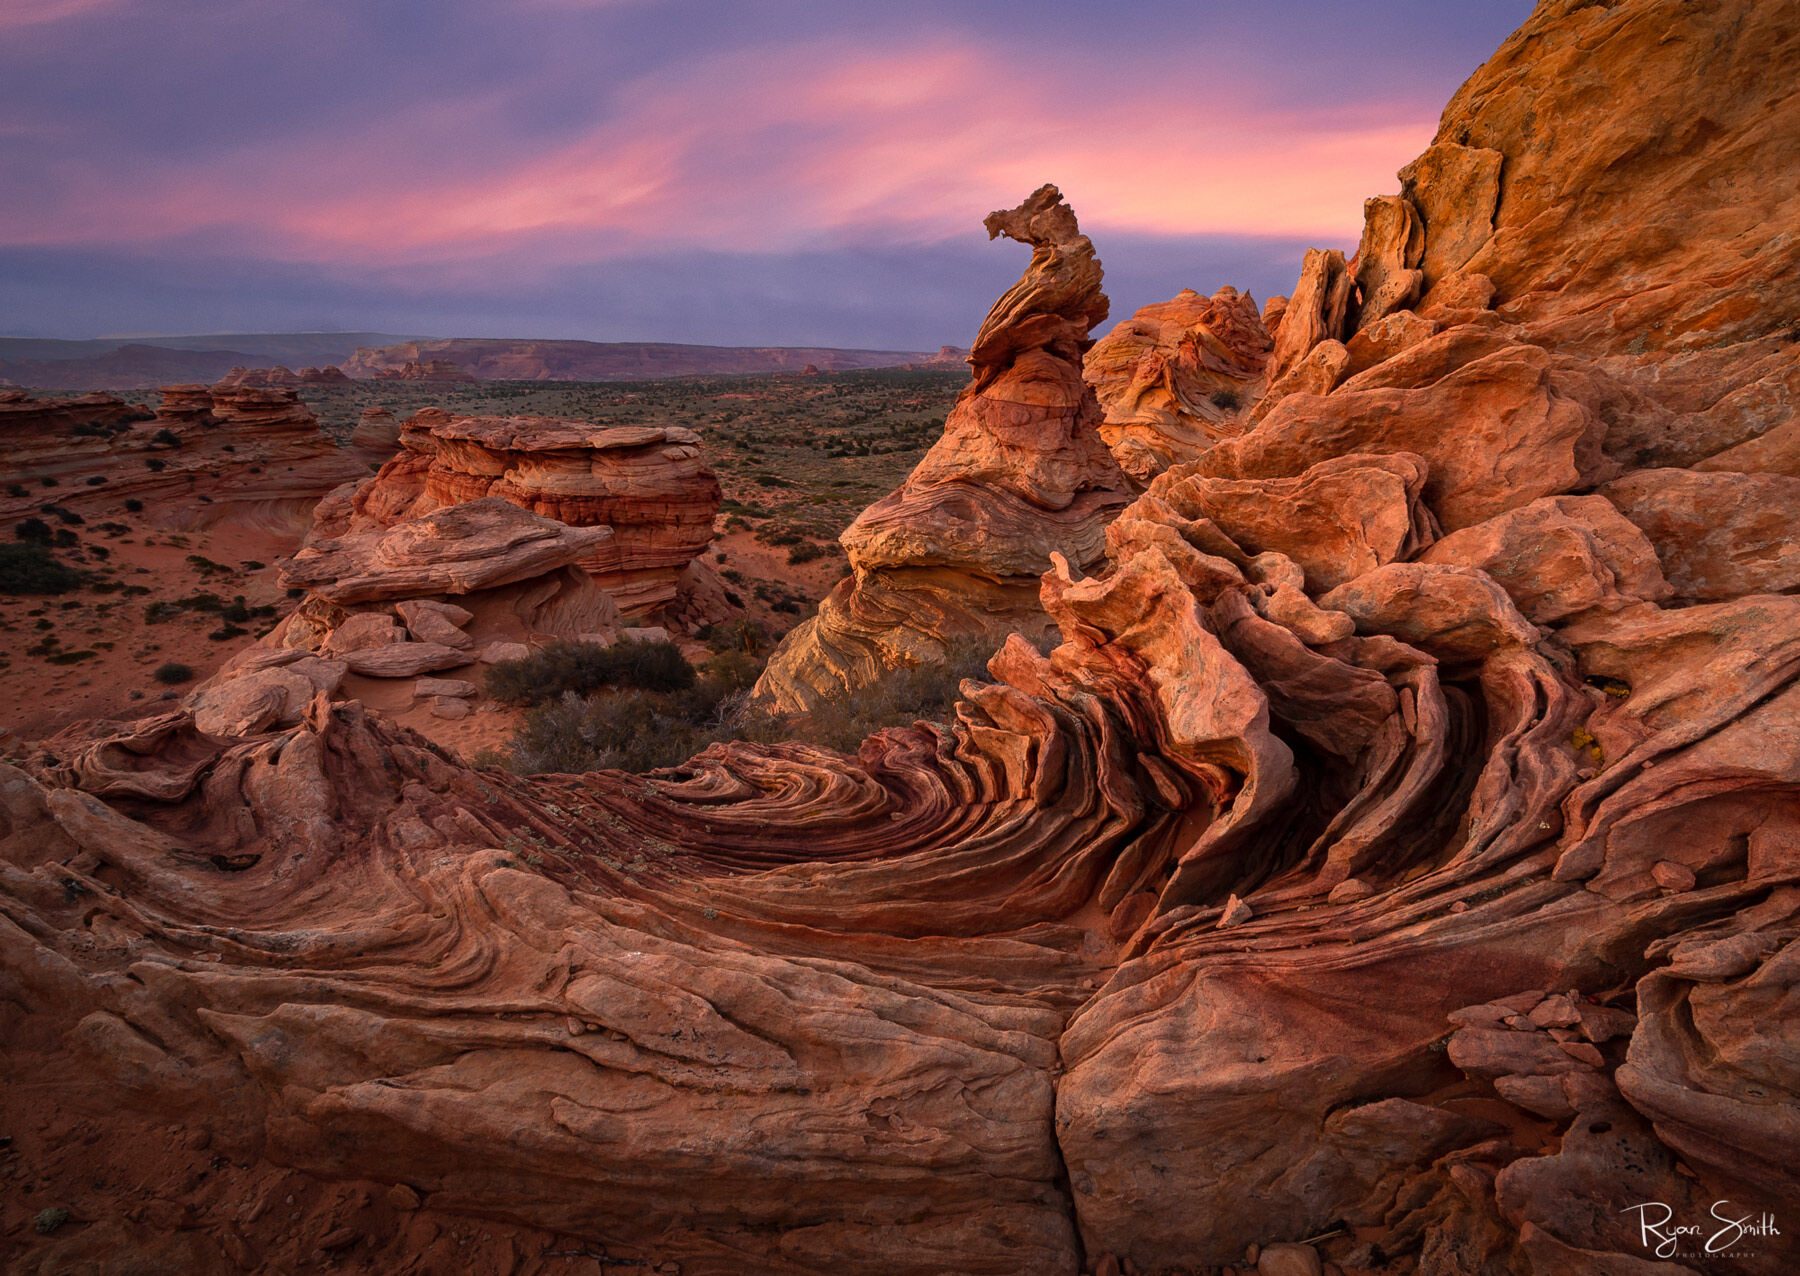 Rock formation has a rising spire that appears like a snake or seahorse with wave-like folds of red rock surrounding it with purple and pink sunset skies.